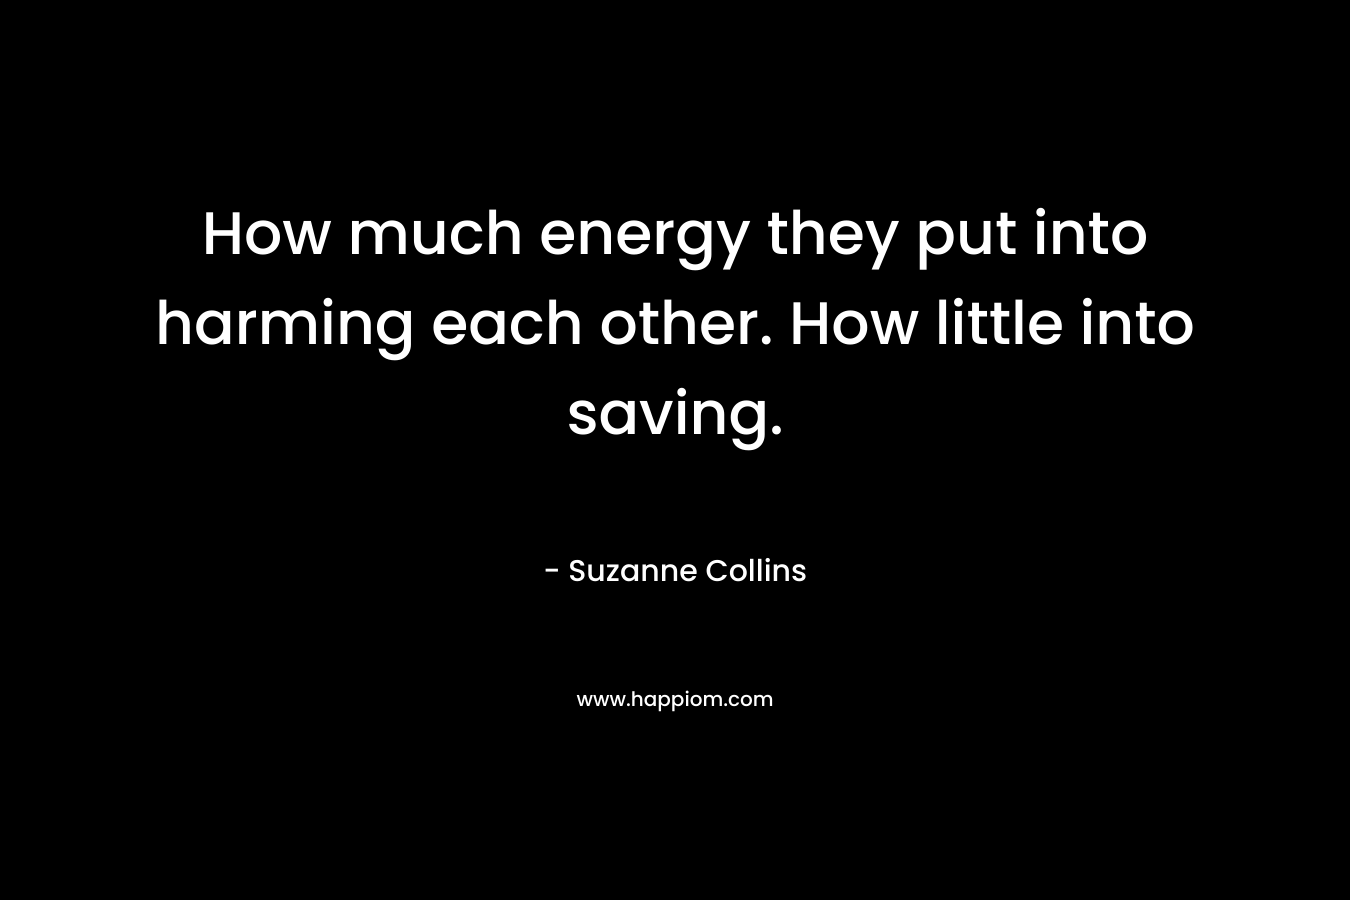 How much energy they put into harming each other. How little into saving.